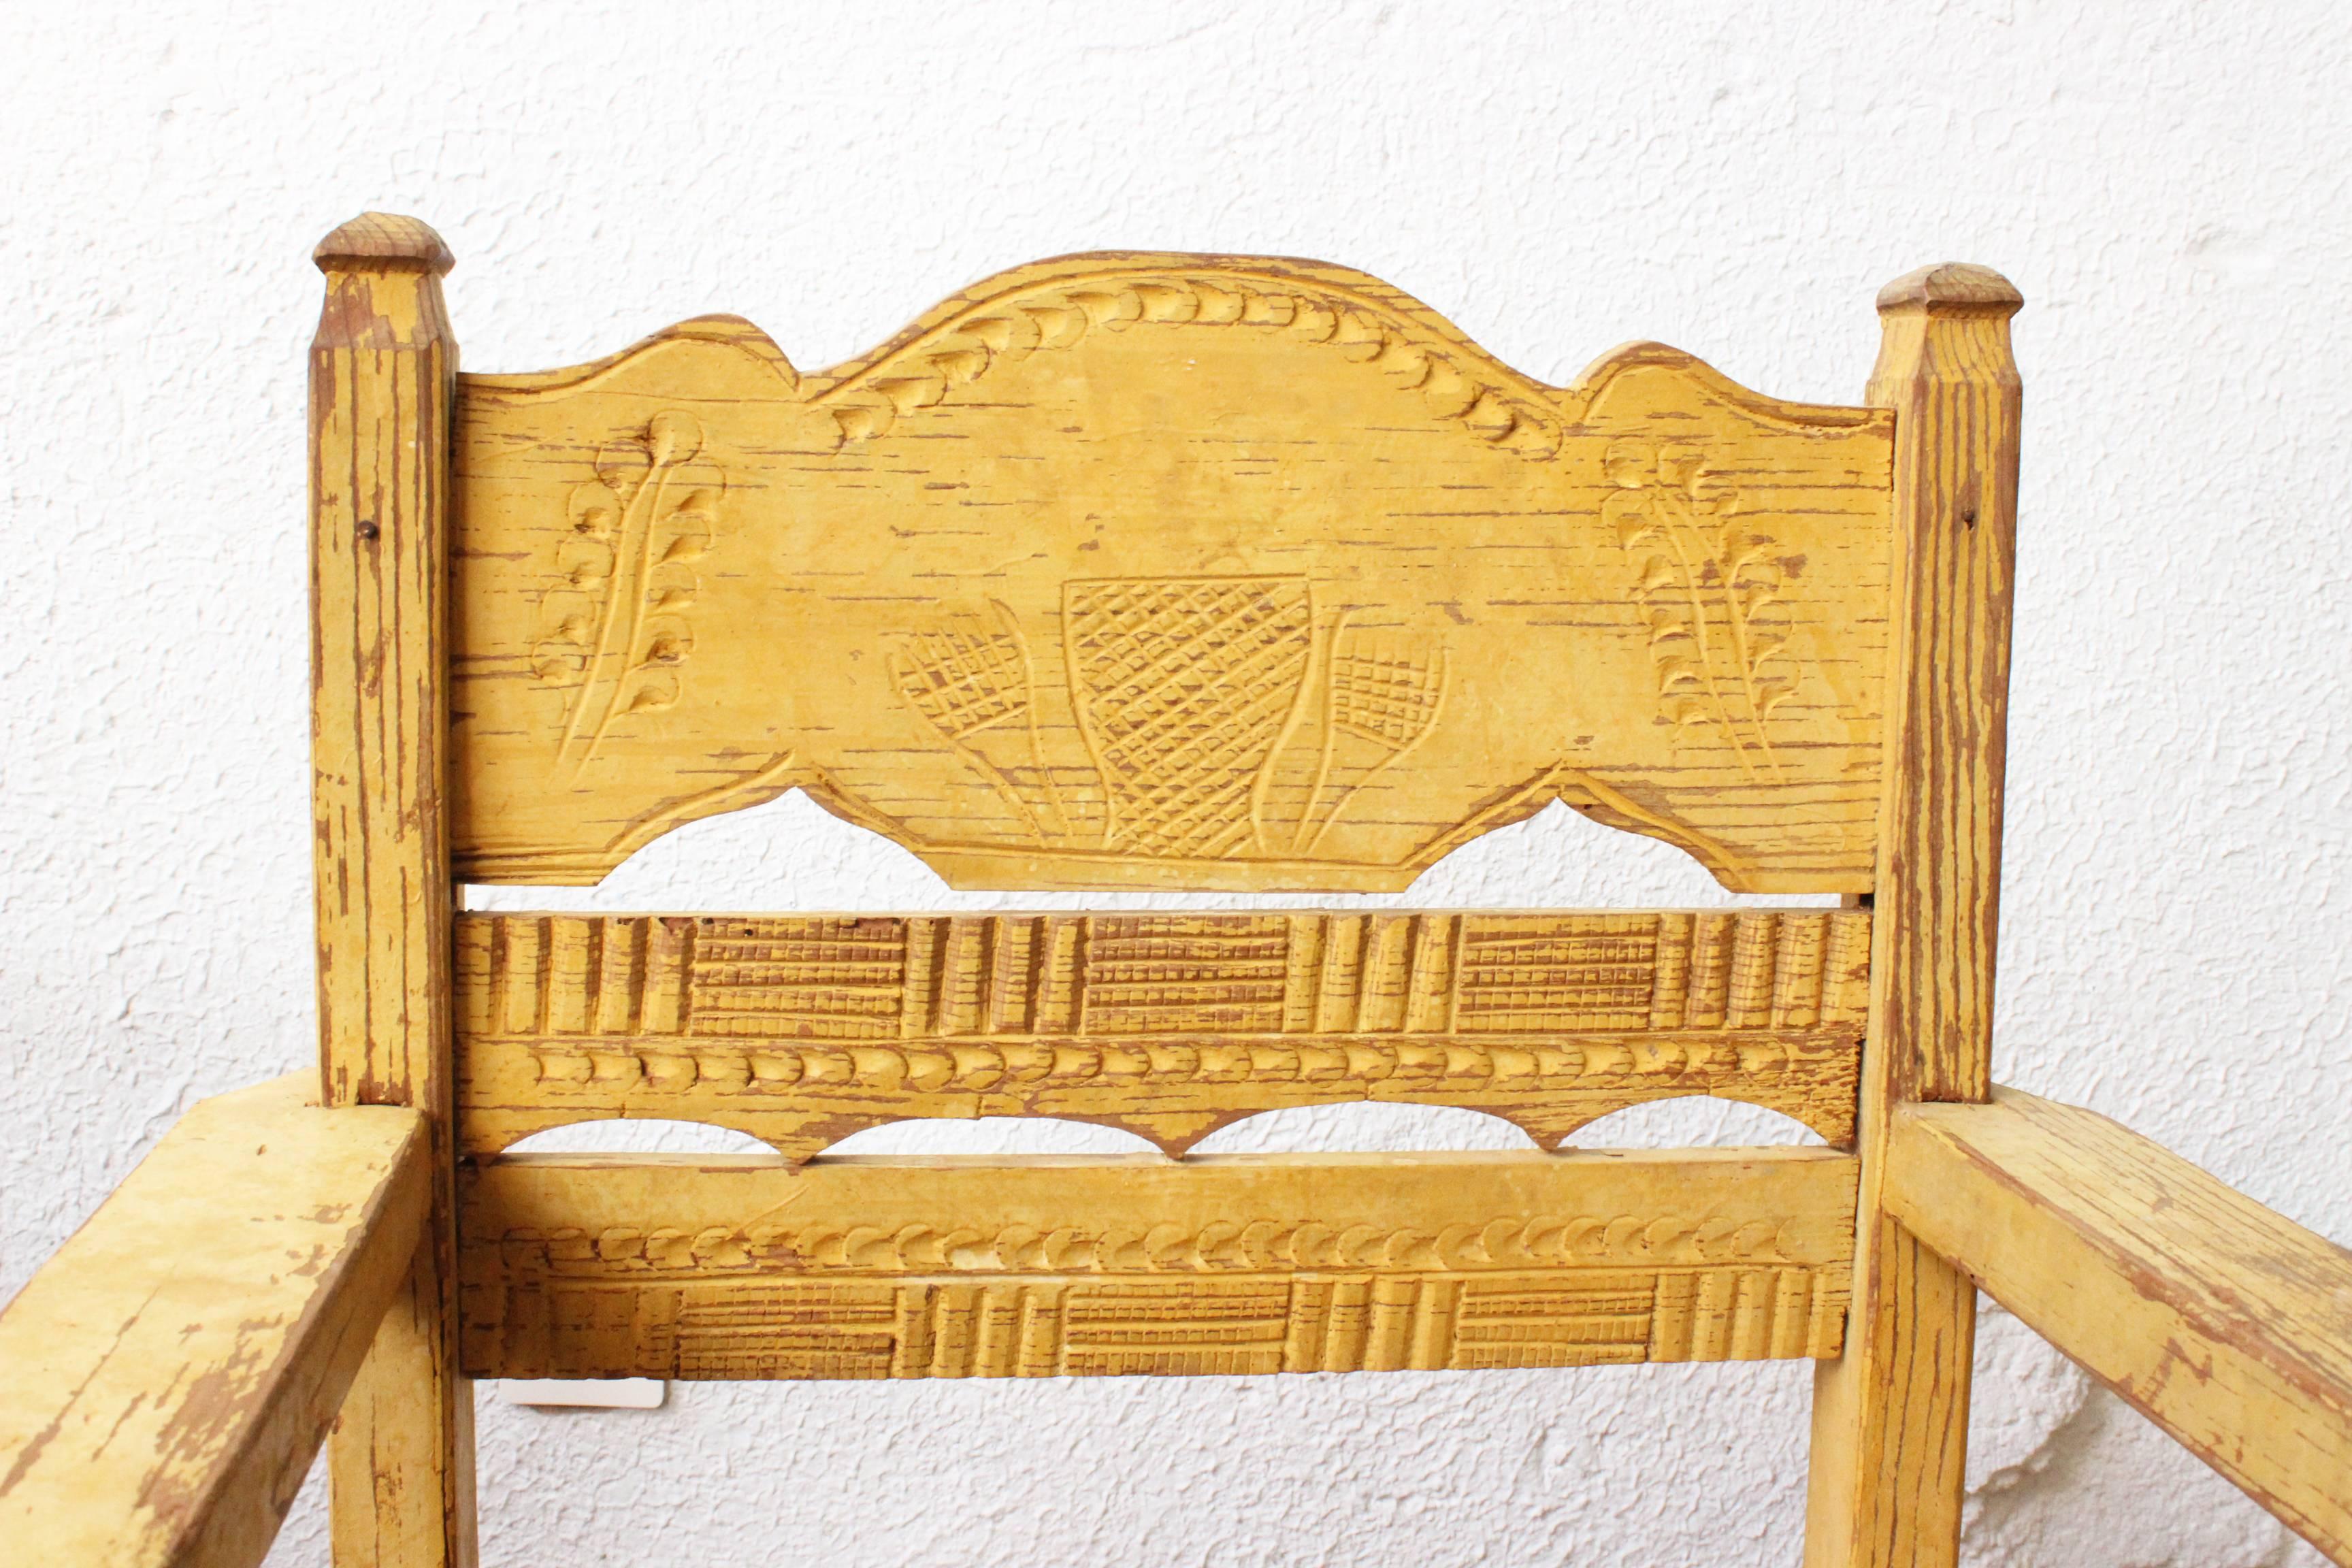 20th Century Late 19th Century Set of Chairs Found in Western Mexico